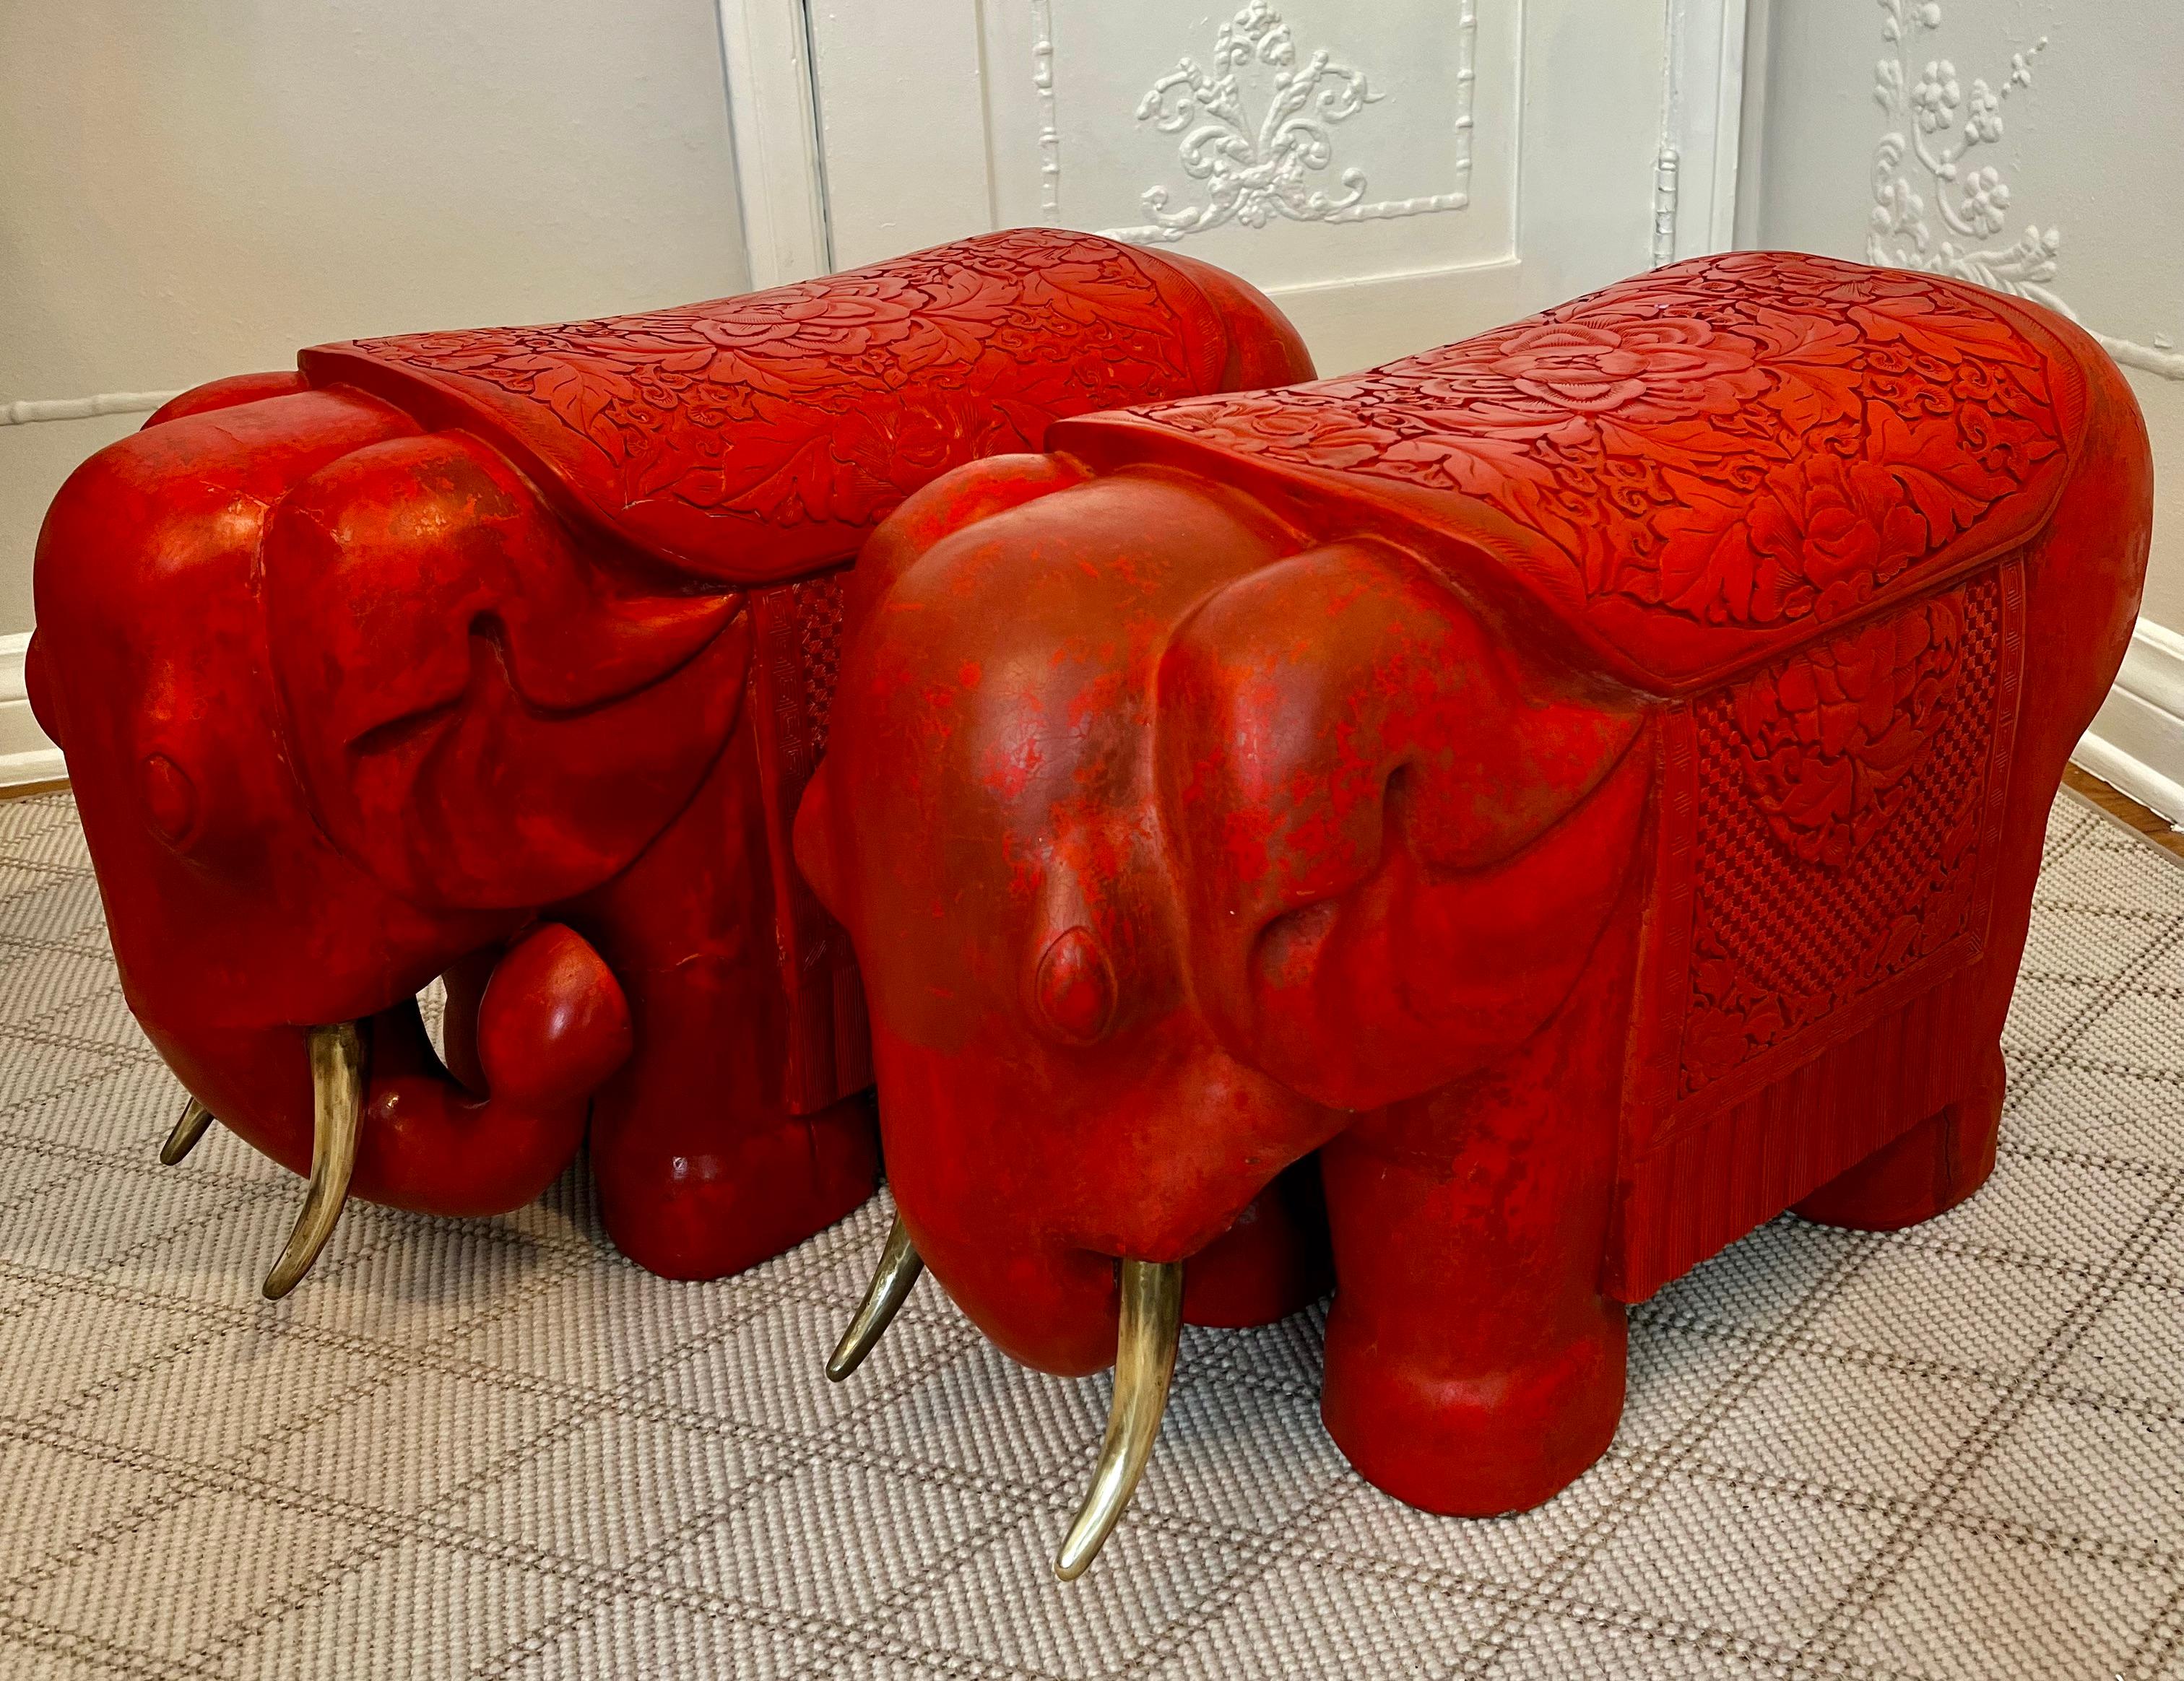 A pair of Cinnabar red hand carved elephants with solid brass tusks. the trunks are up, allowing the good energy to flow wherever you place them.

A Wonderfull statement flanking a doorway or can be used as a stool, or pull up from under a console